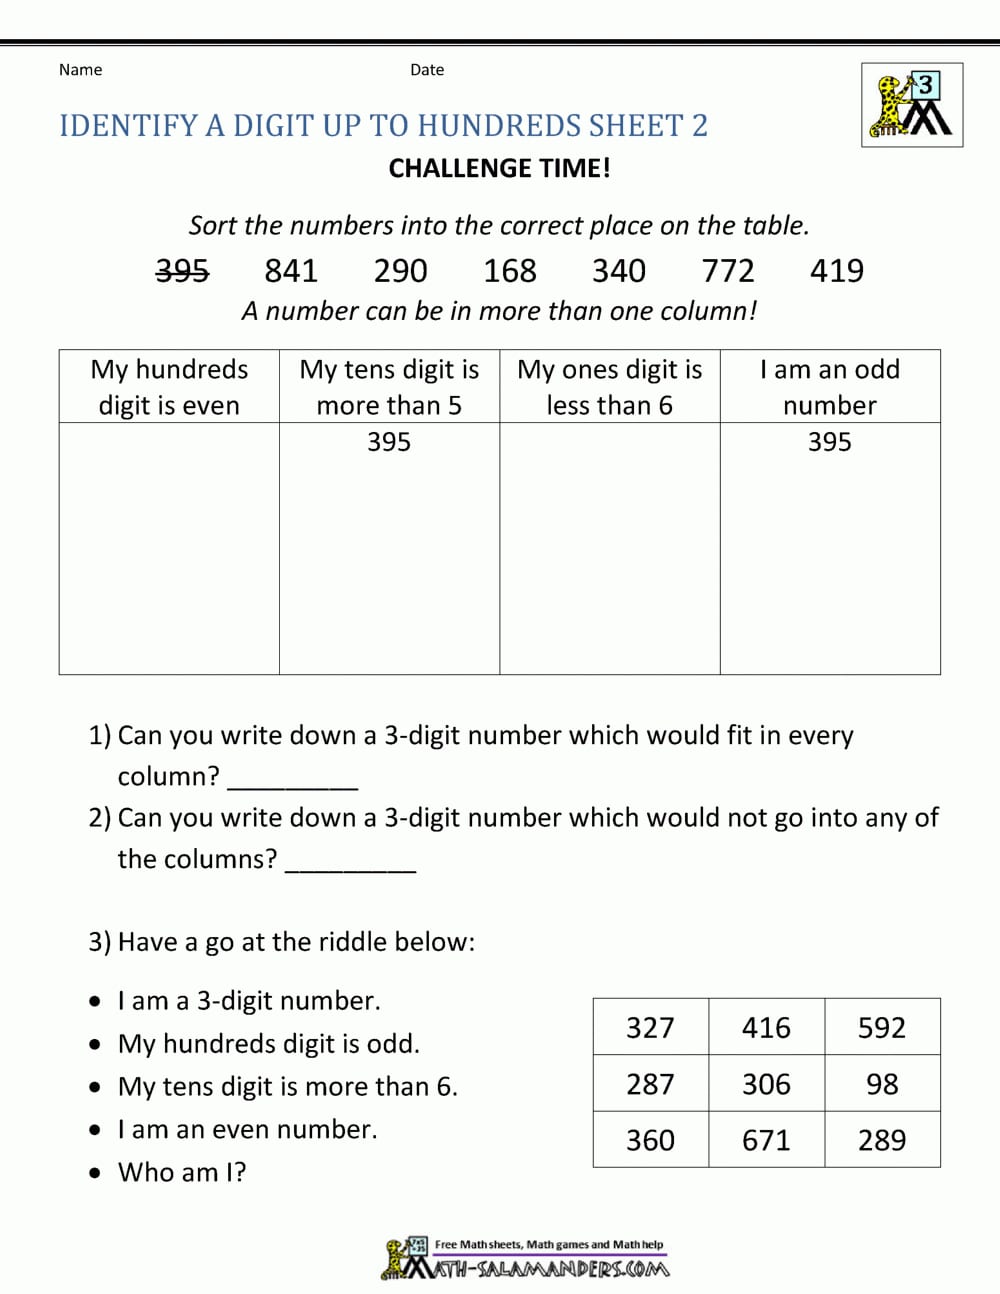 place-values-3rd-grade-math-worksheets-for-kids-on-place-value-jumpstart-math-ideas